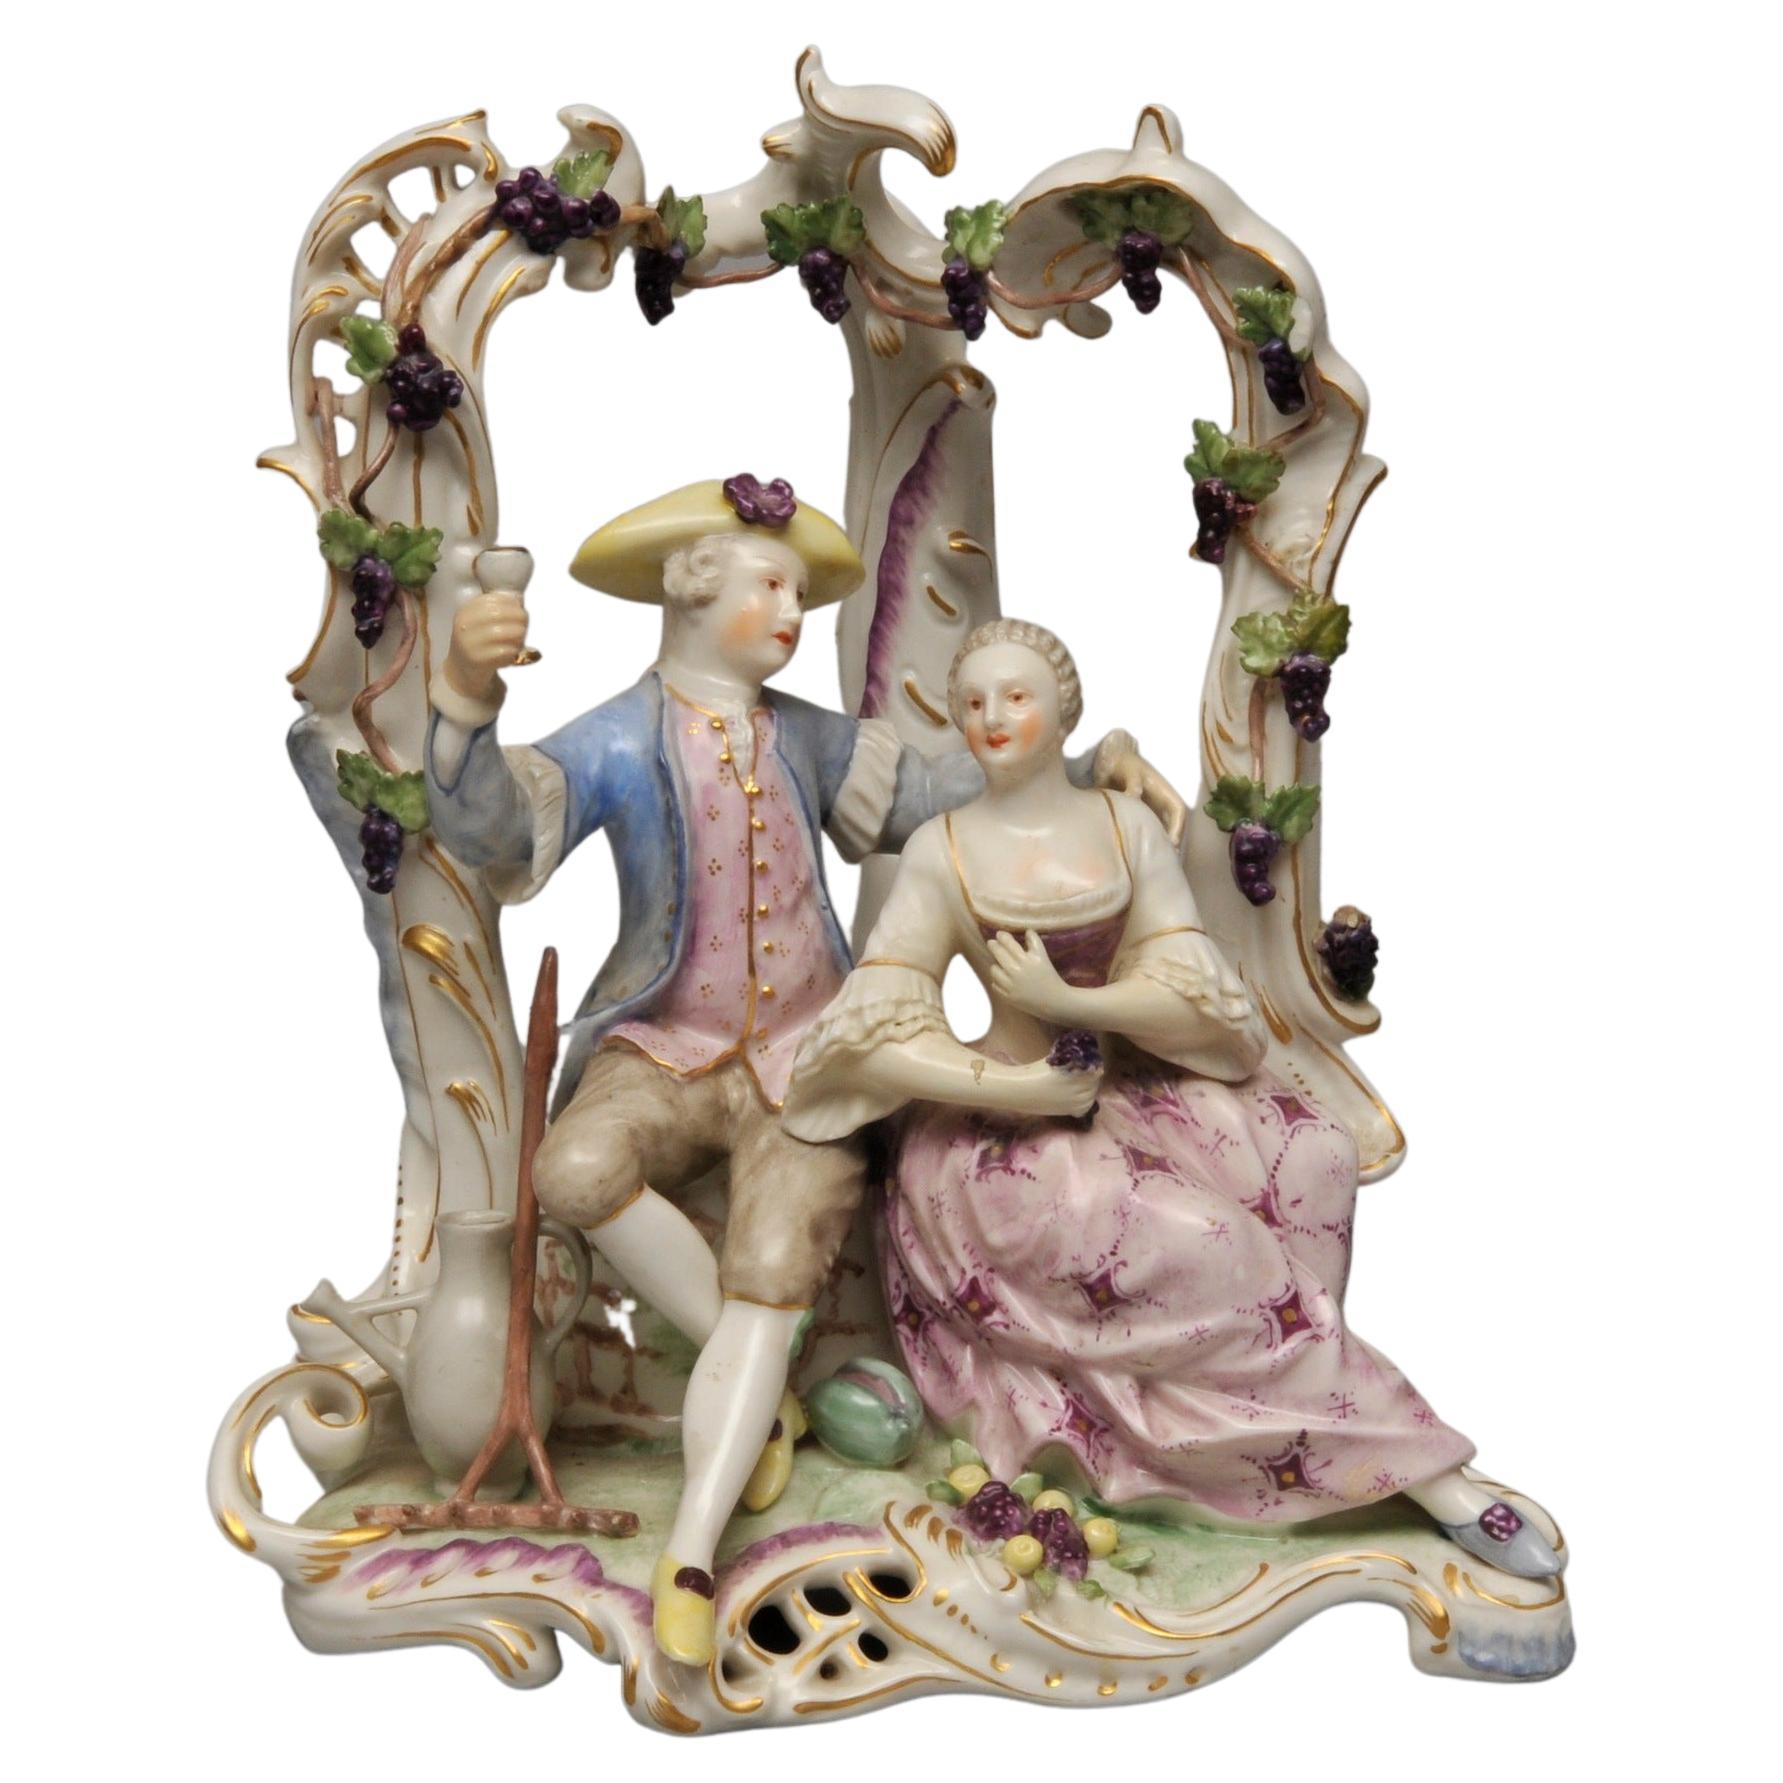 Continental Porcelain “Courting Couple”